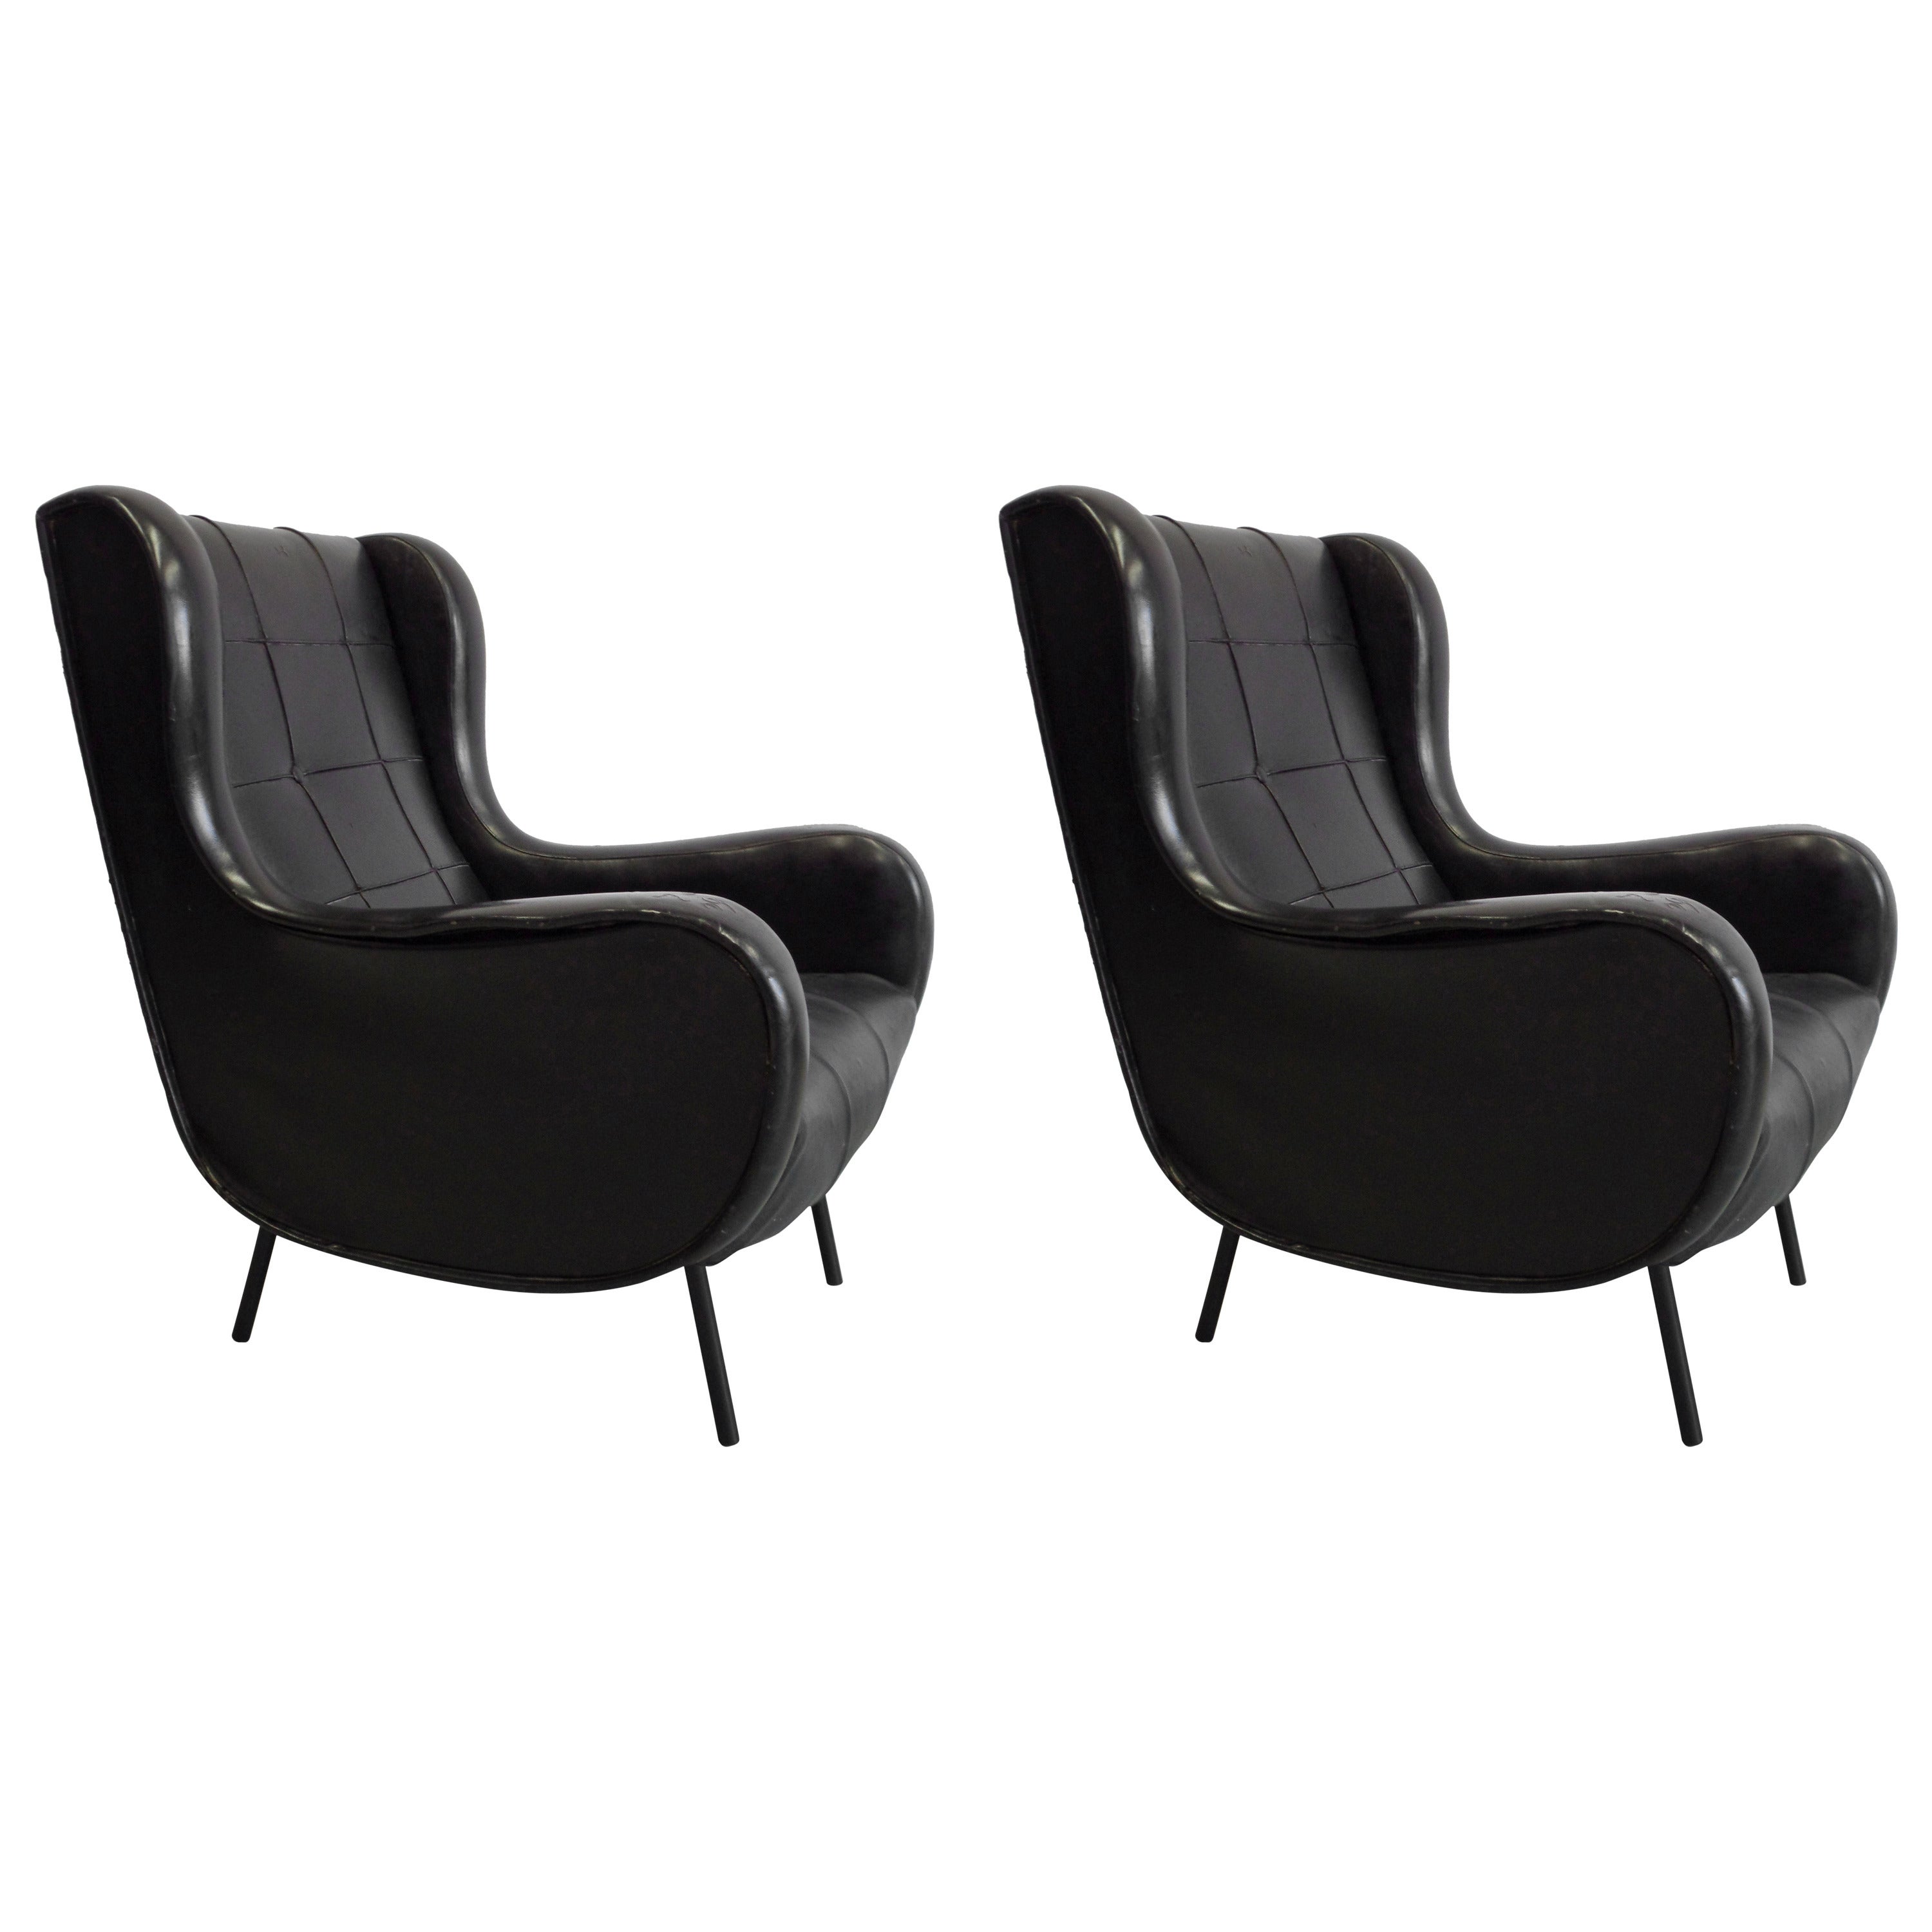 Pair of Italian Lounge Chairs in the Style of Marco Zanuso Senior Chairs